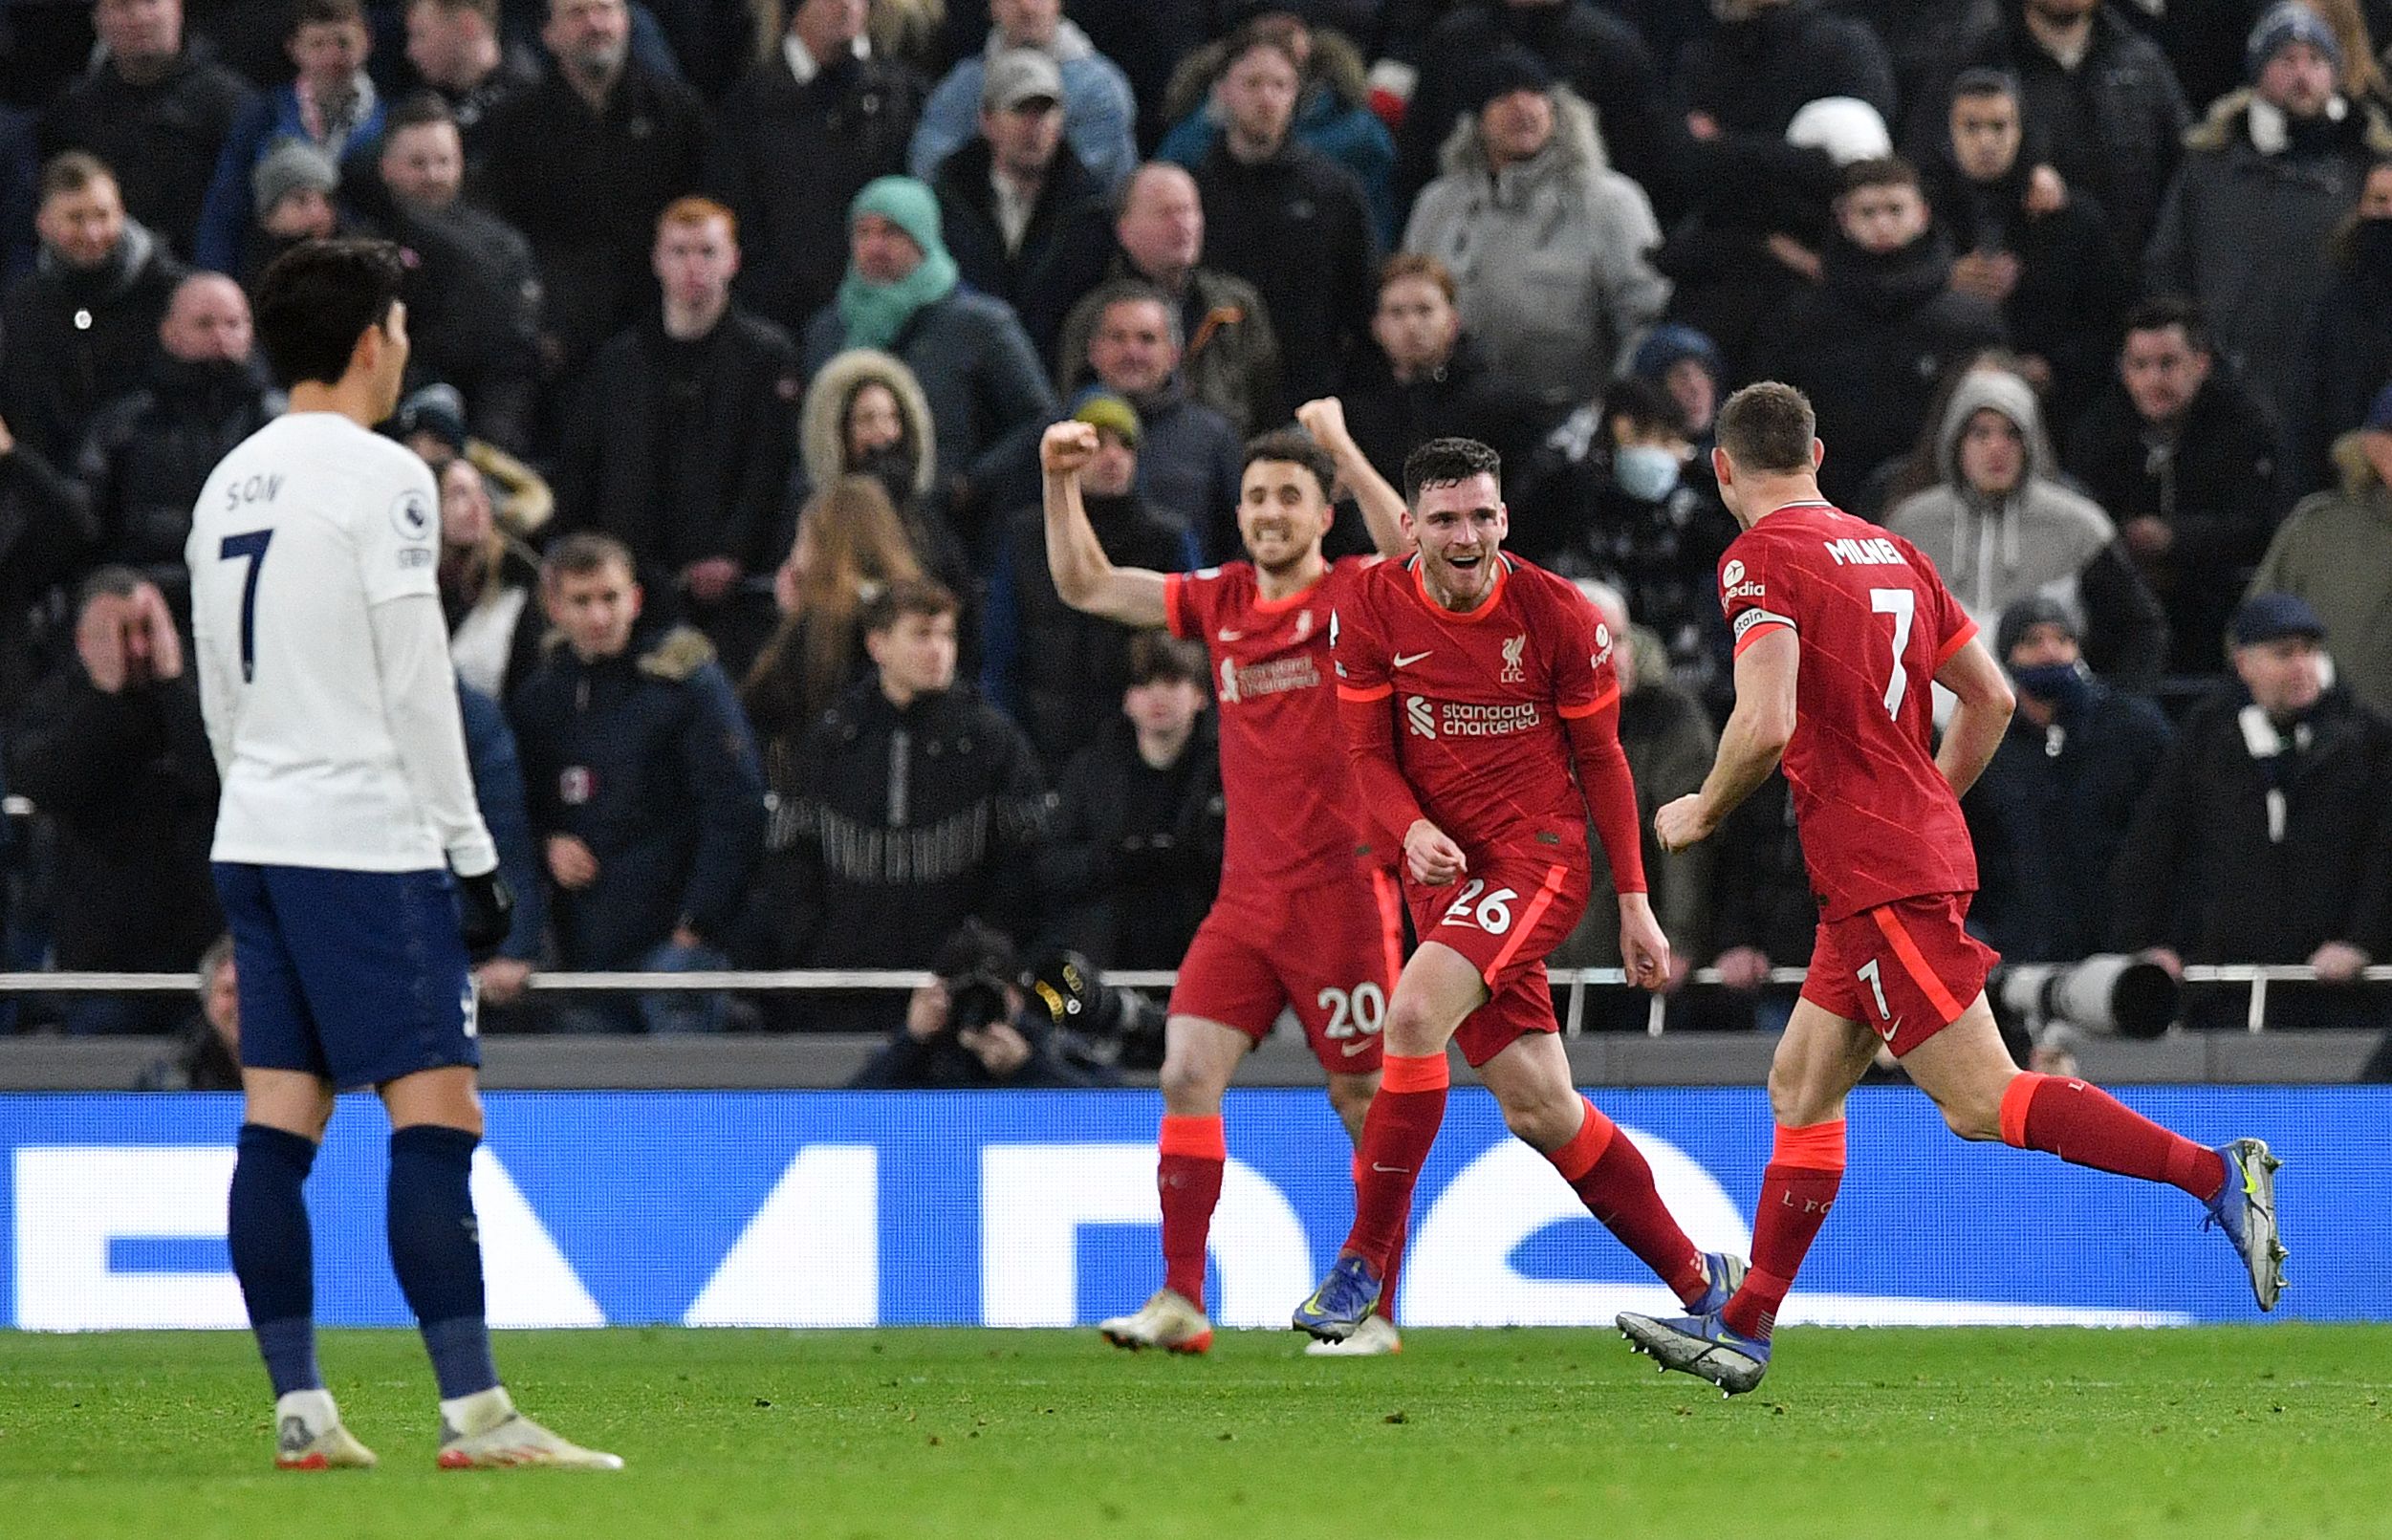 Liverpool meet Tottenham on Saturday evening in a high-stakes Premier League clash